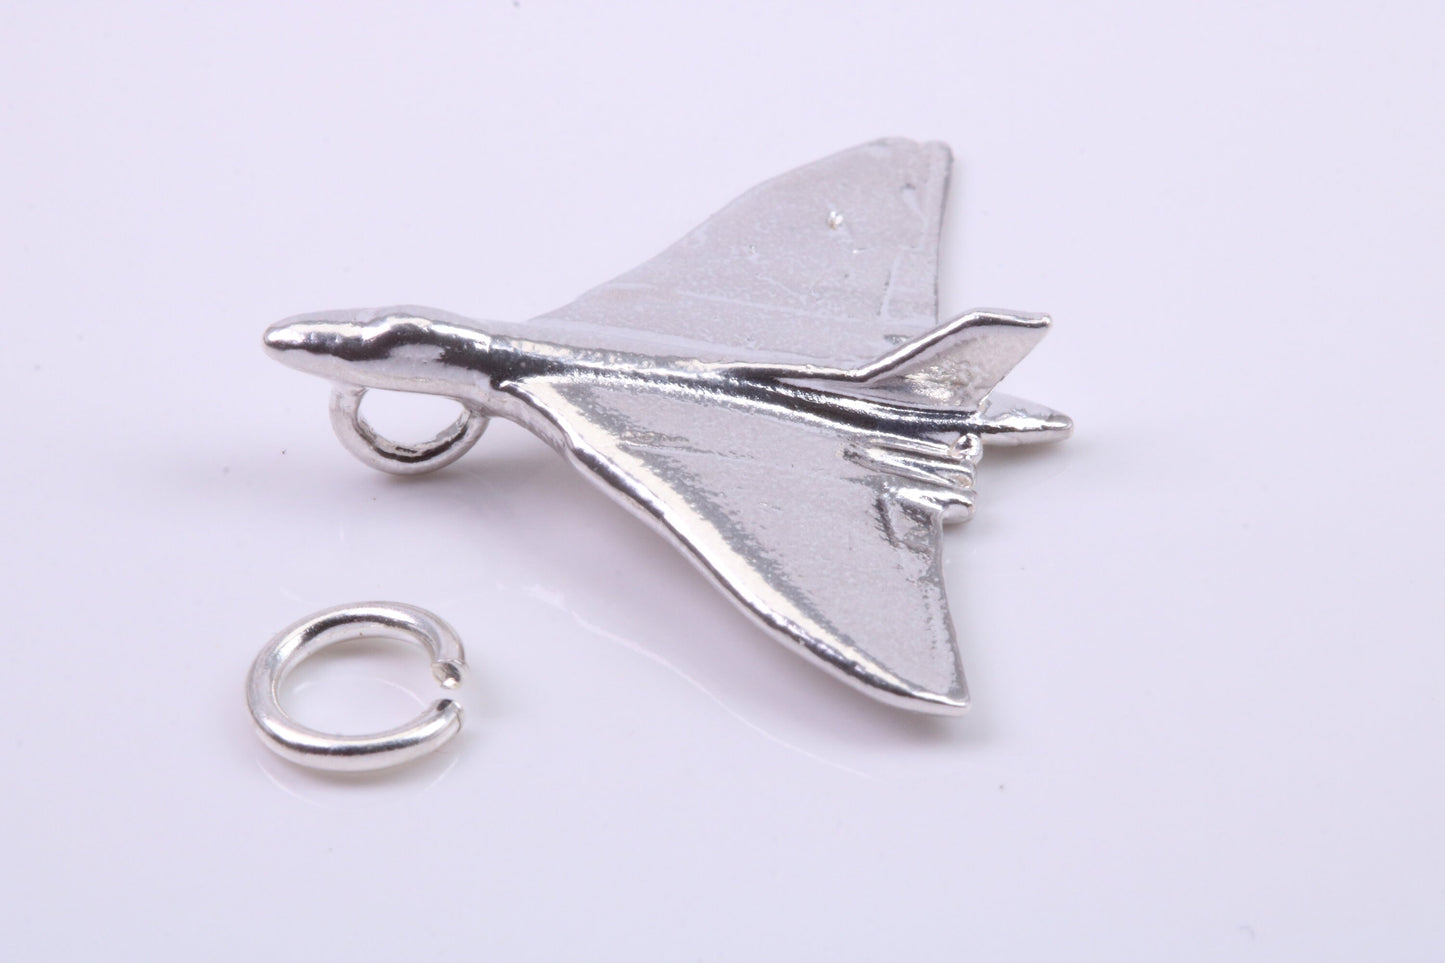 Vulcan Bomber Airplane Charm, Traditional Charm, Made from Solid 925 Grade Sterling Silver, Complete with Attachment Link